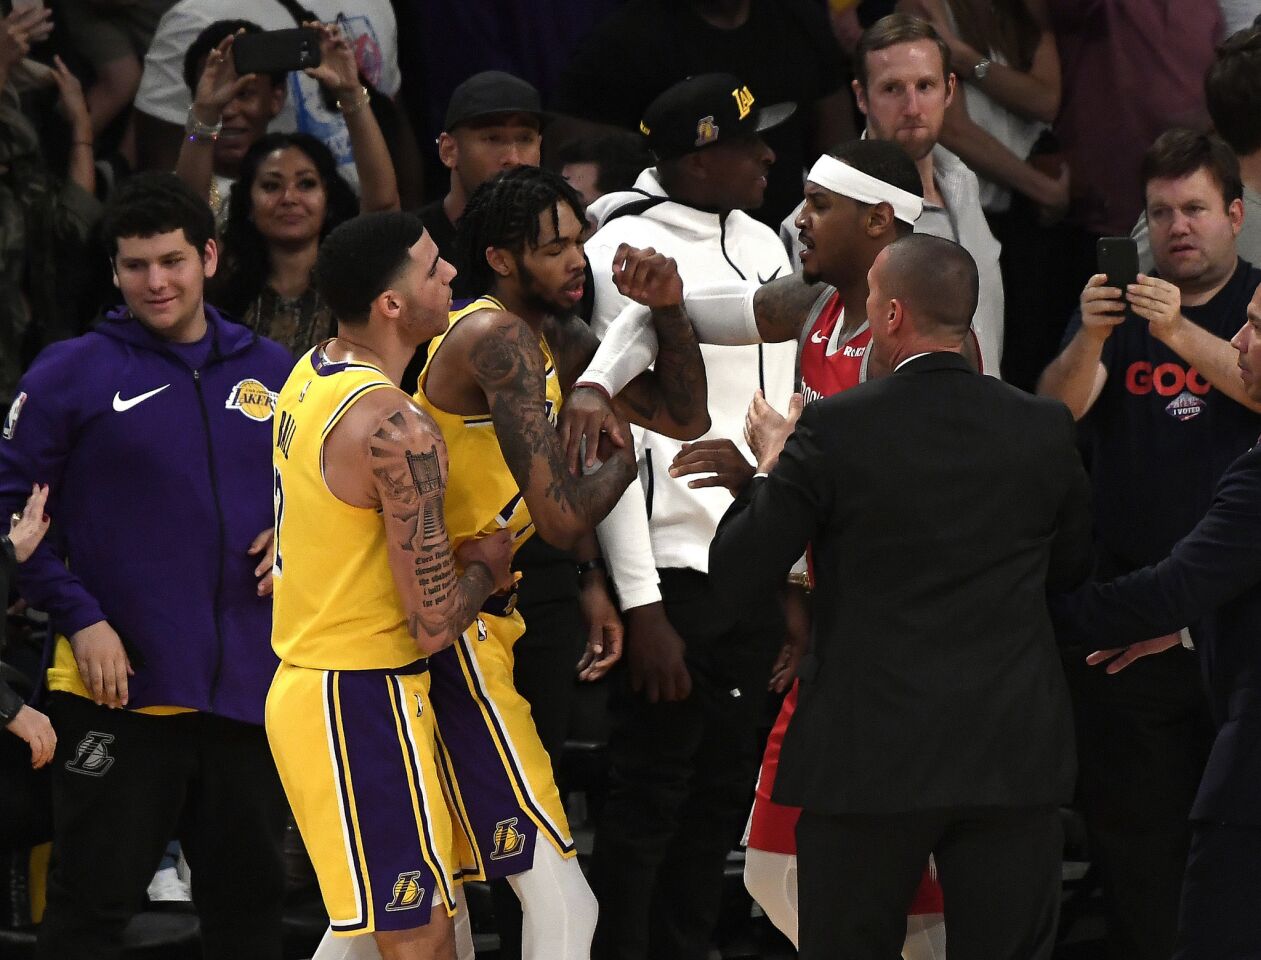 Lakers guard Lonzo Ball tries to separate teammate Brandon Ingram and Rockets forward Carmelo Anthony after Ingram ignited a brawl by shoving Rockets guard James Harden.